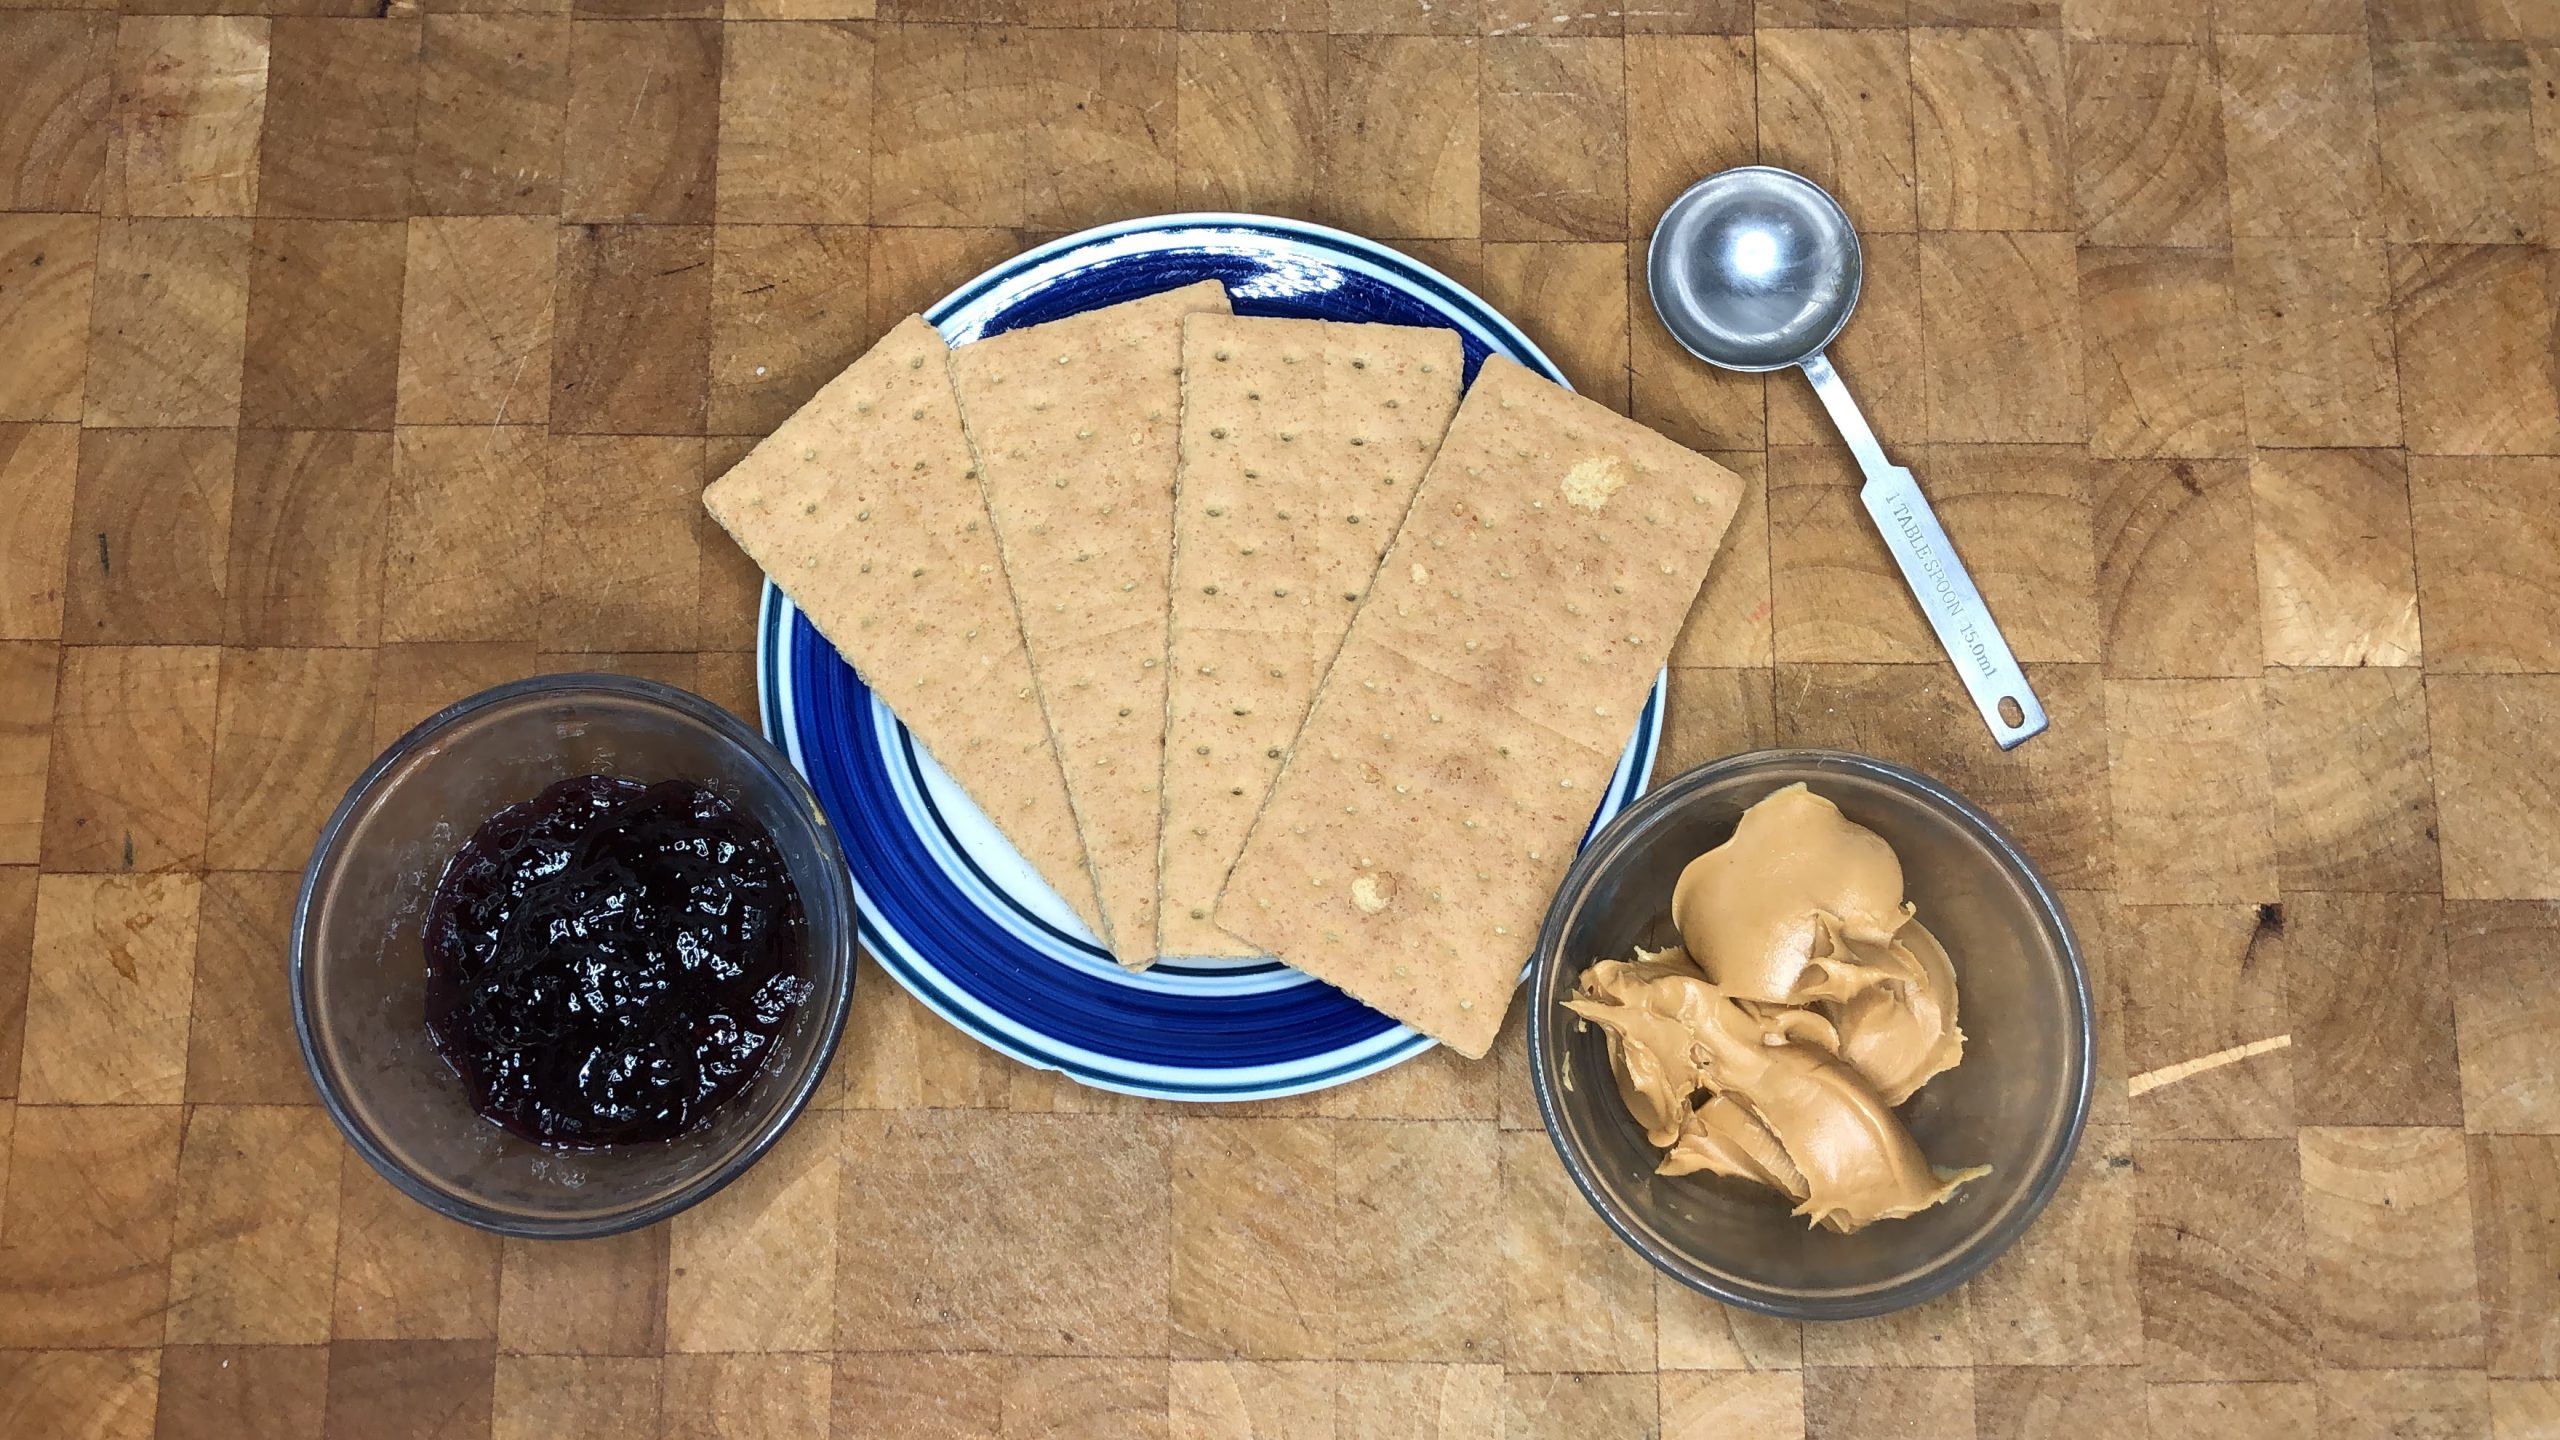 Four graham crackers on a plate next to a measuring spoon and bowls of peanut butter and jelly.